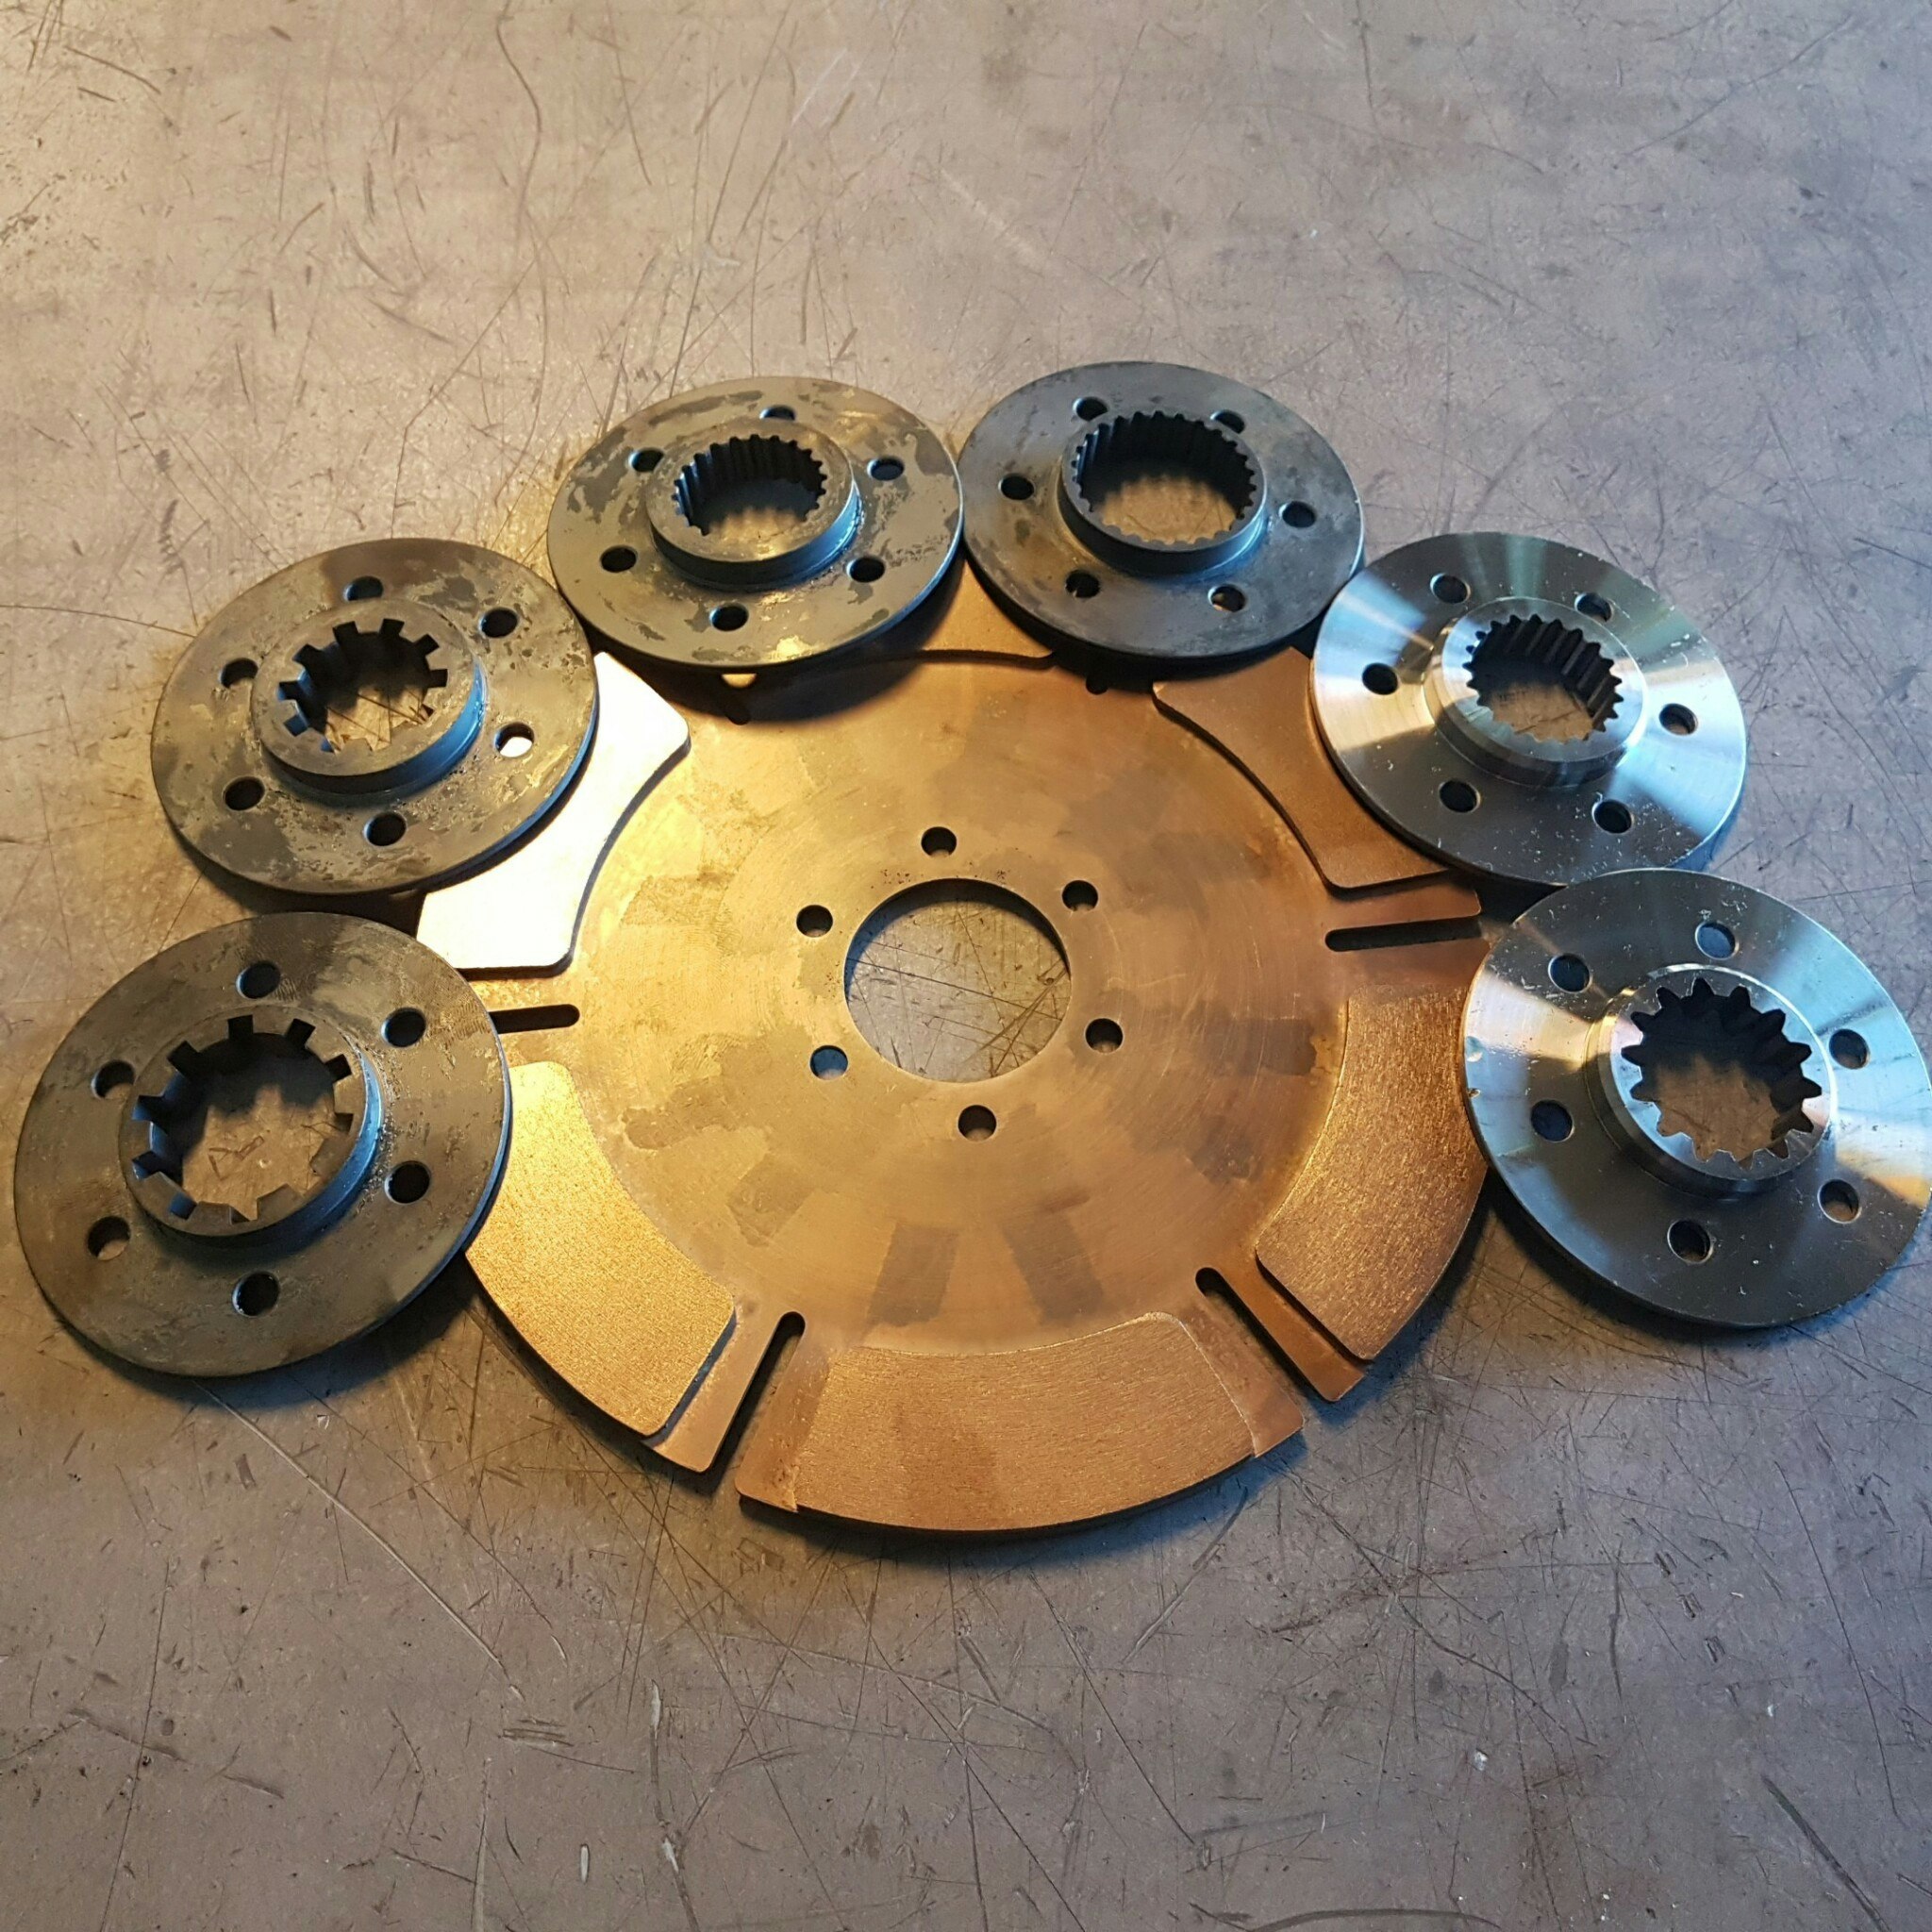 Tenaci copper 2;6 mm disc - 184 mm 6 puck with hub included